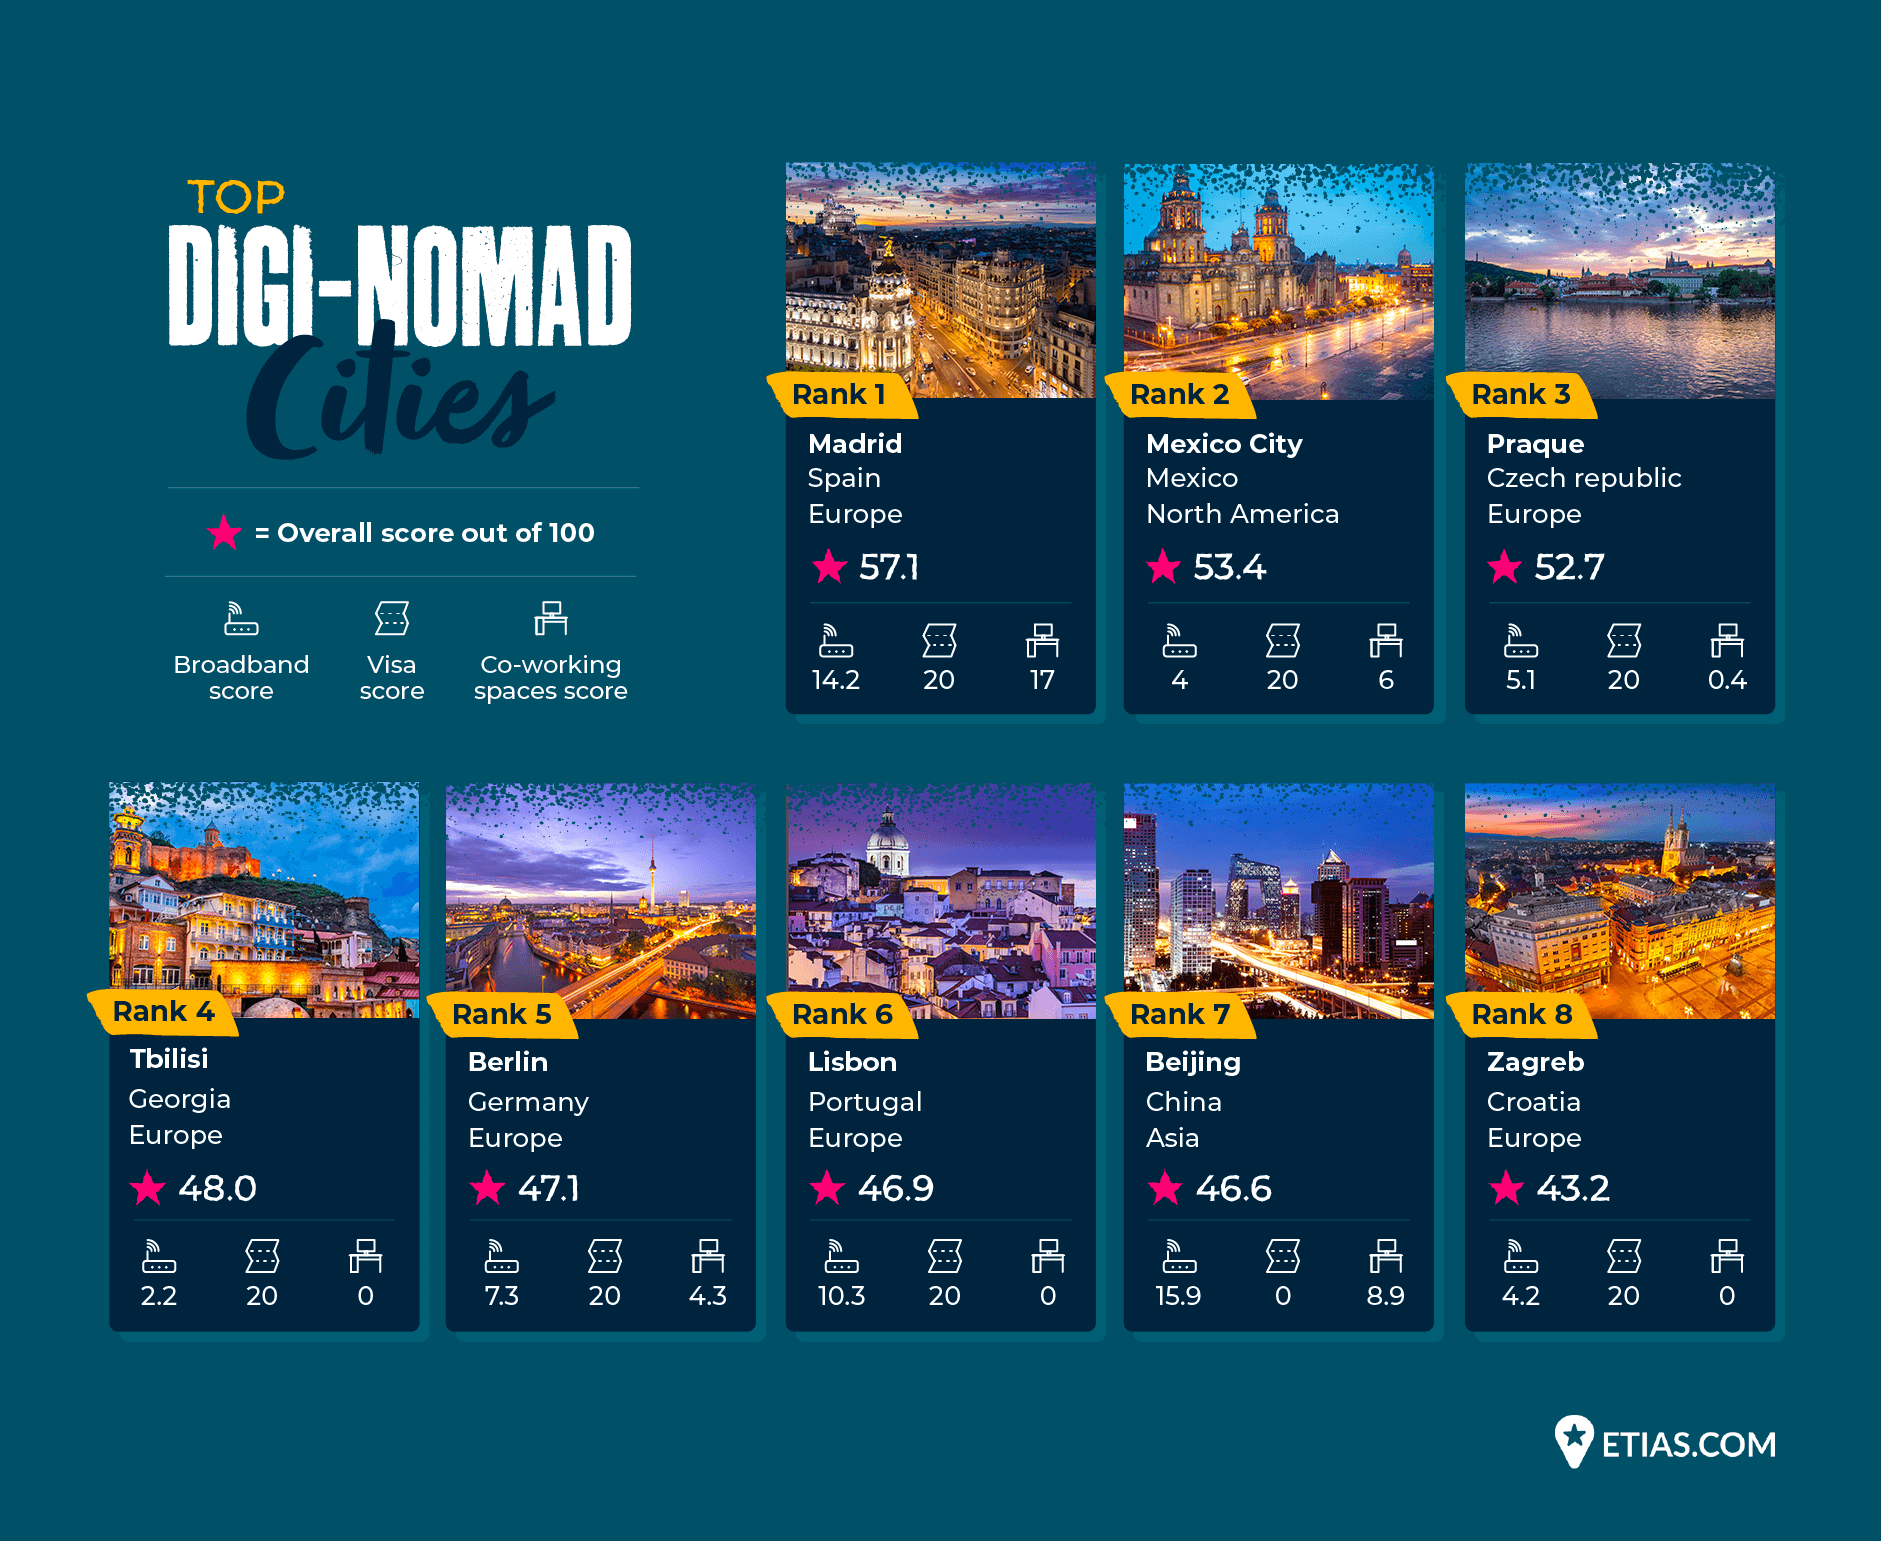 A graphic ranking digital nomad cities from 1 to 10.